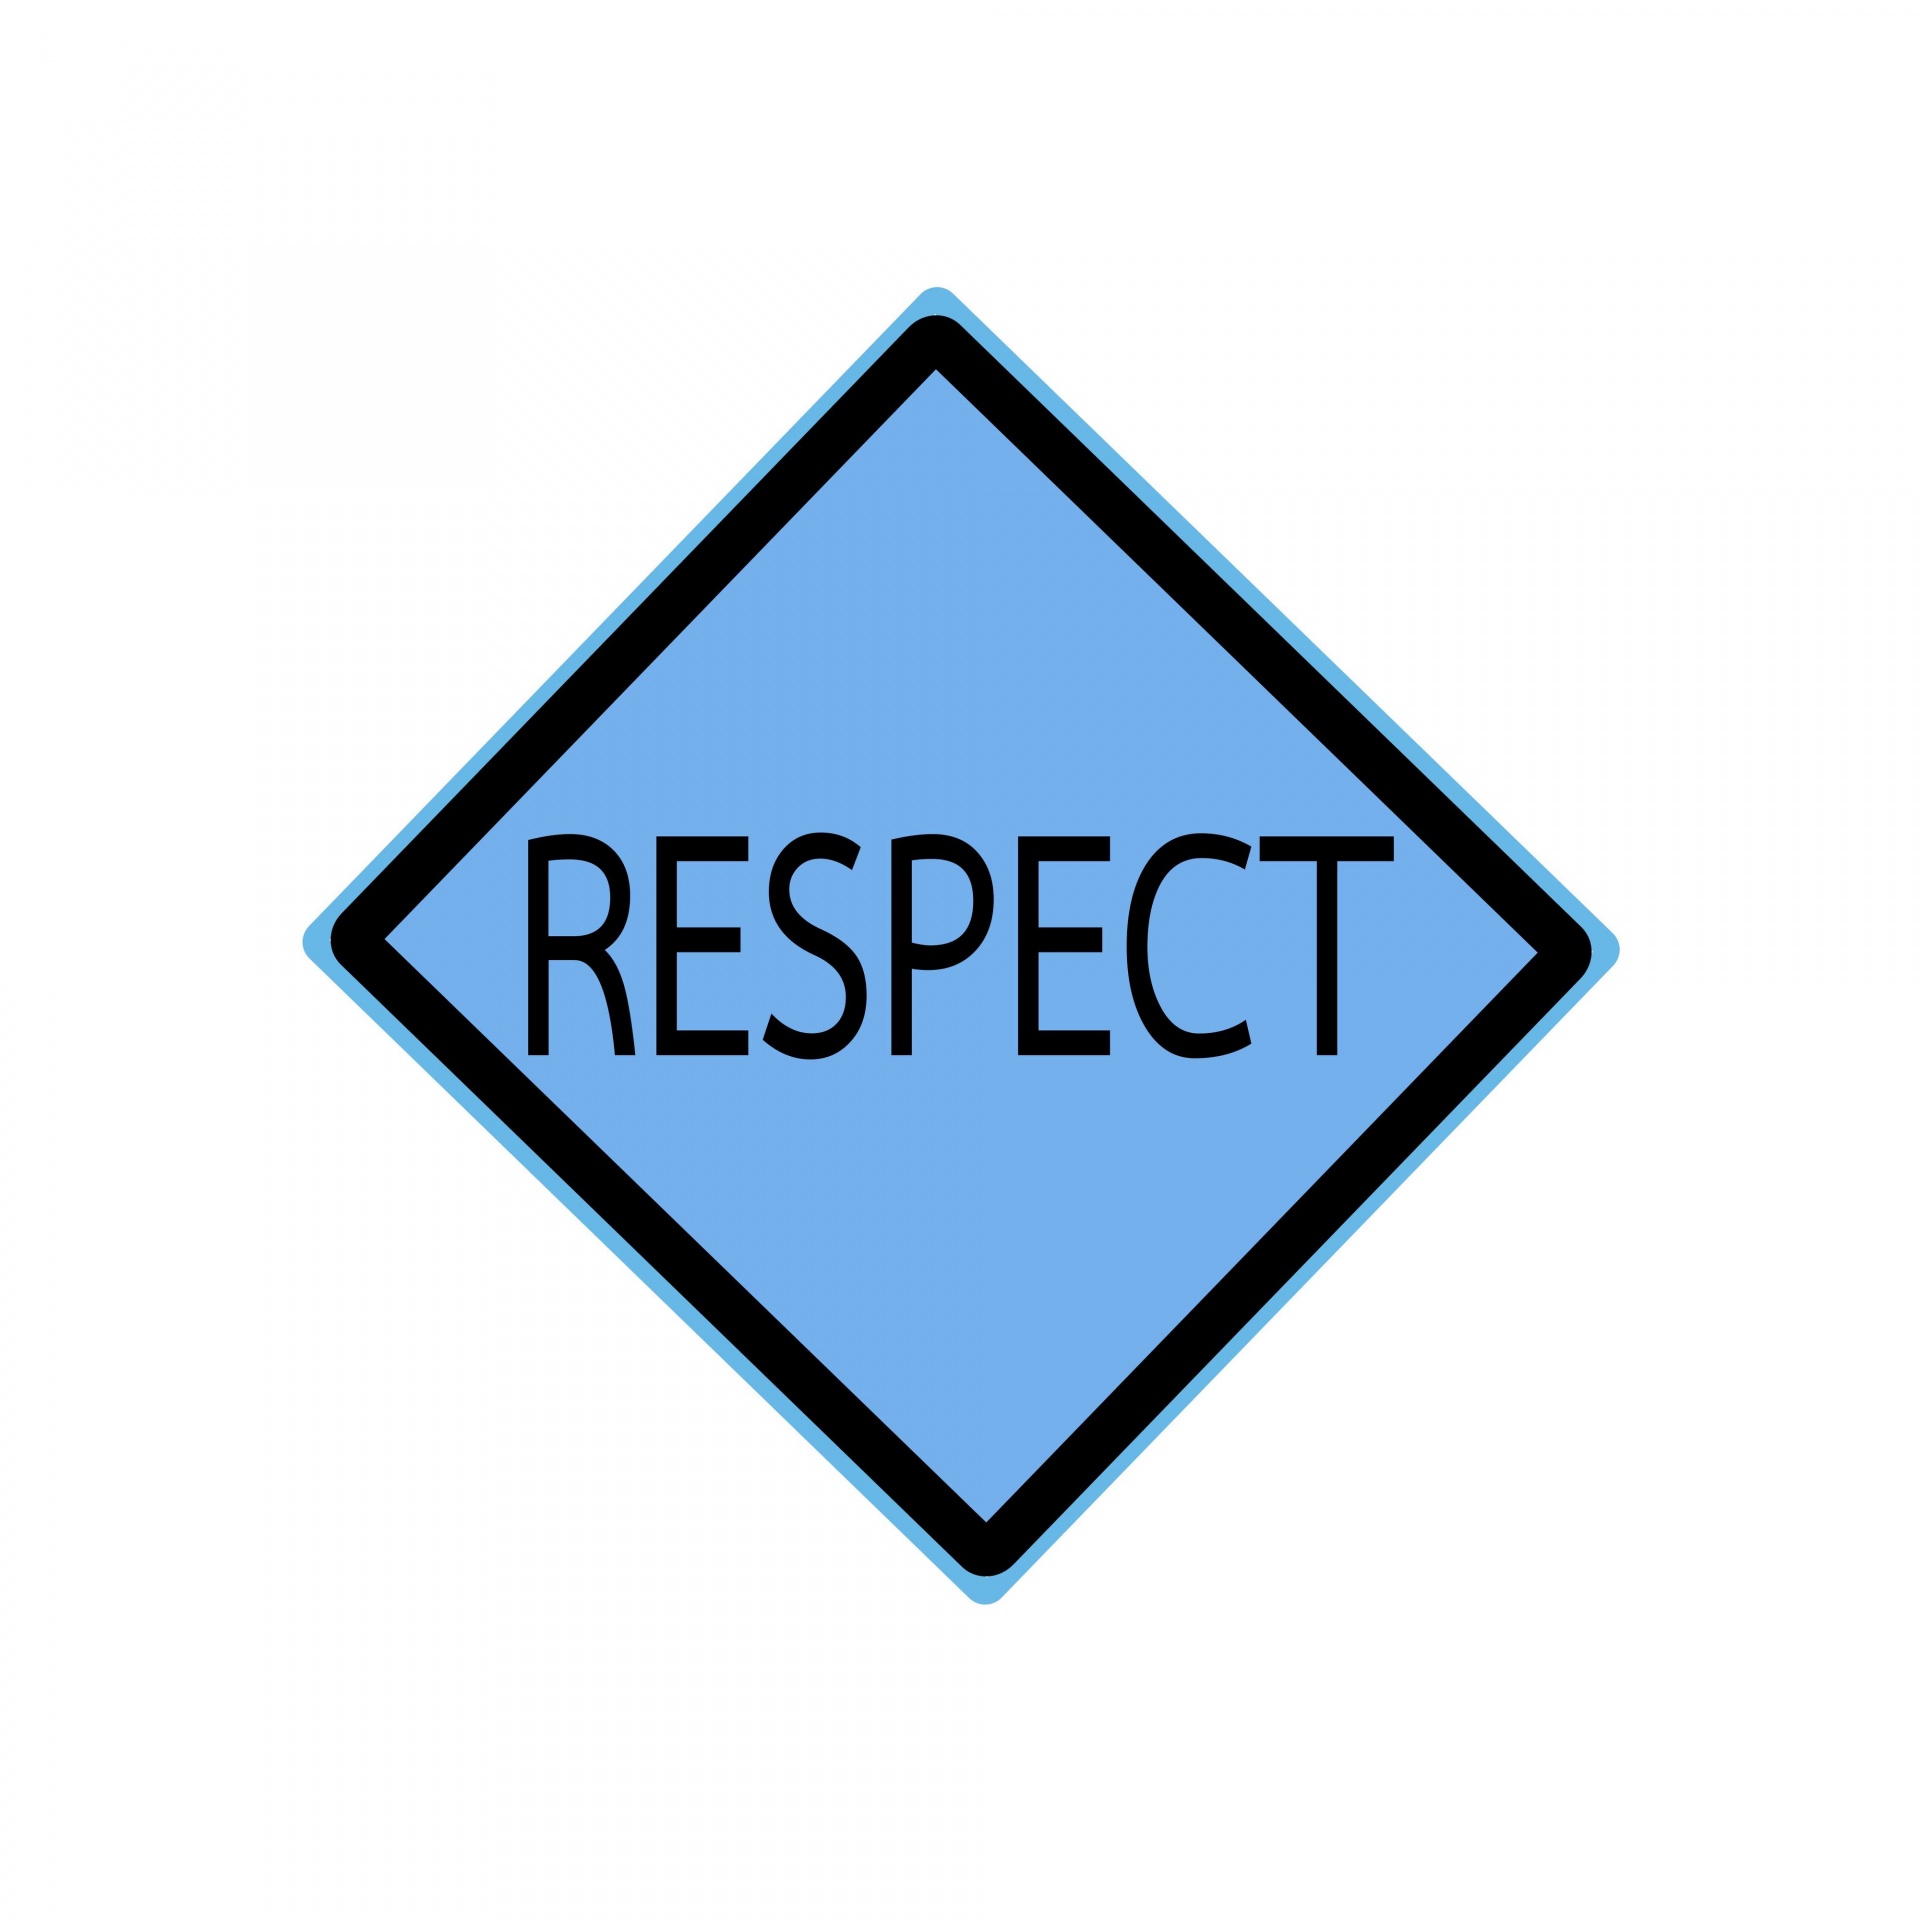 RESPECT Black Stamp Text On Blue